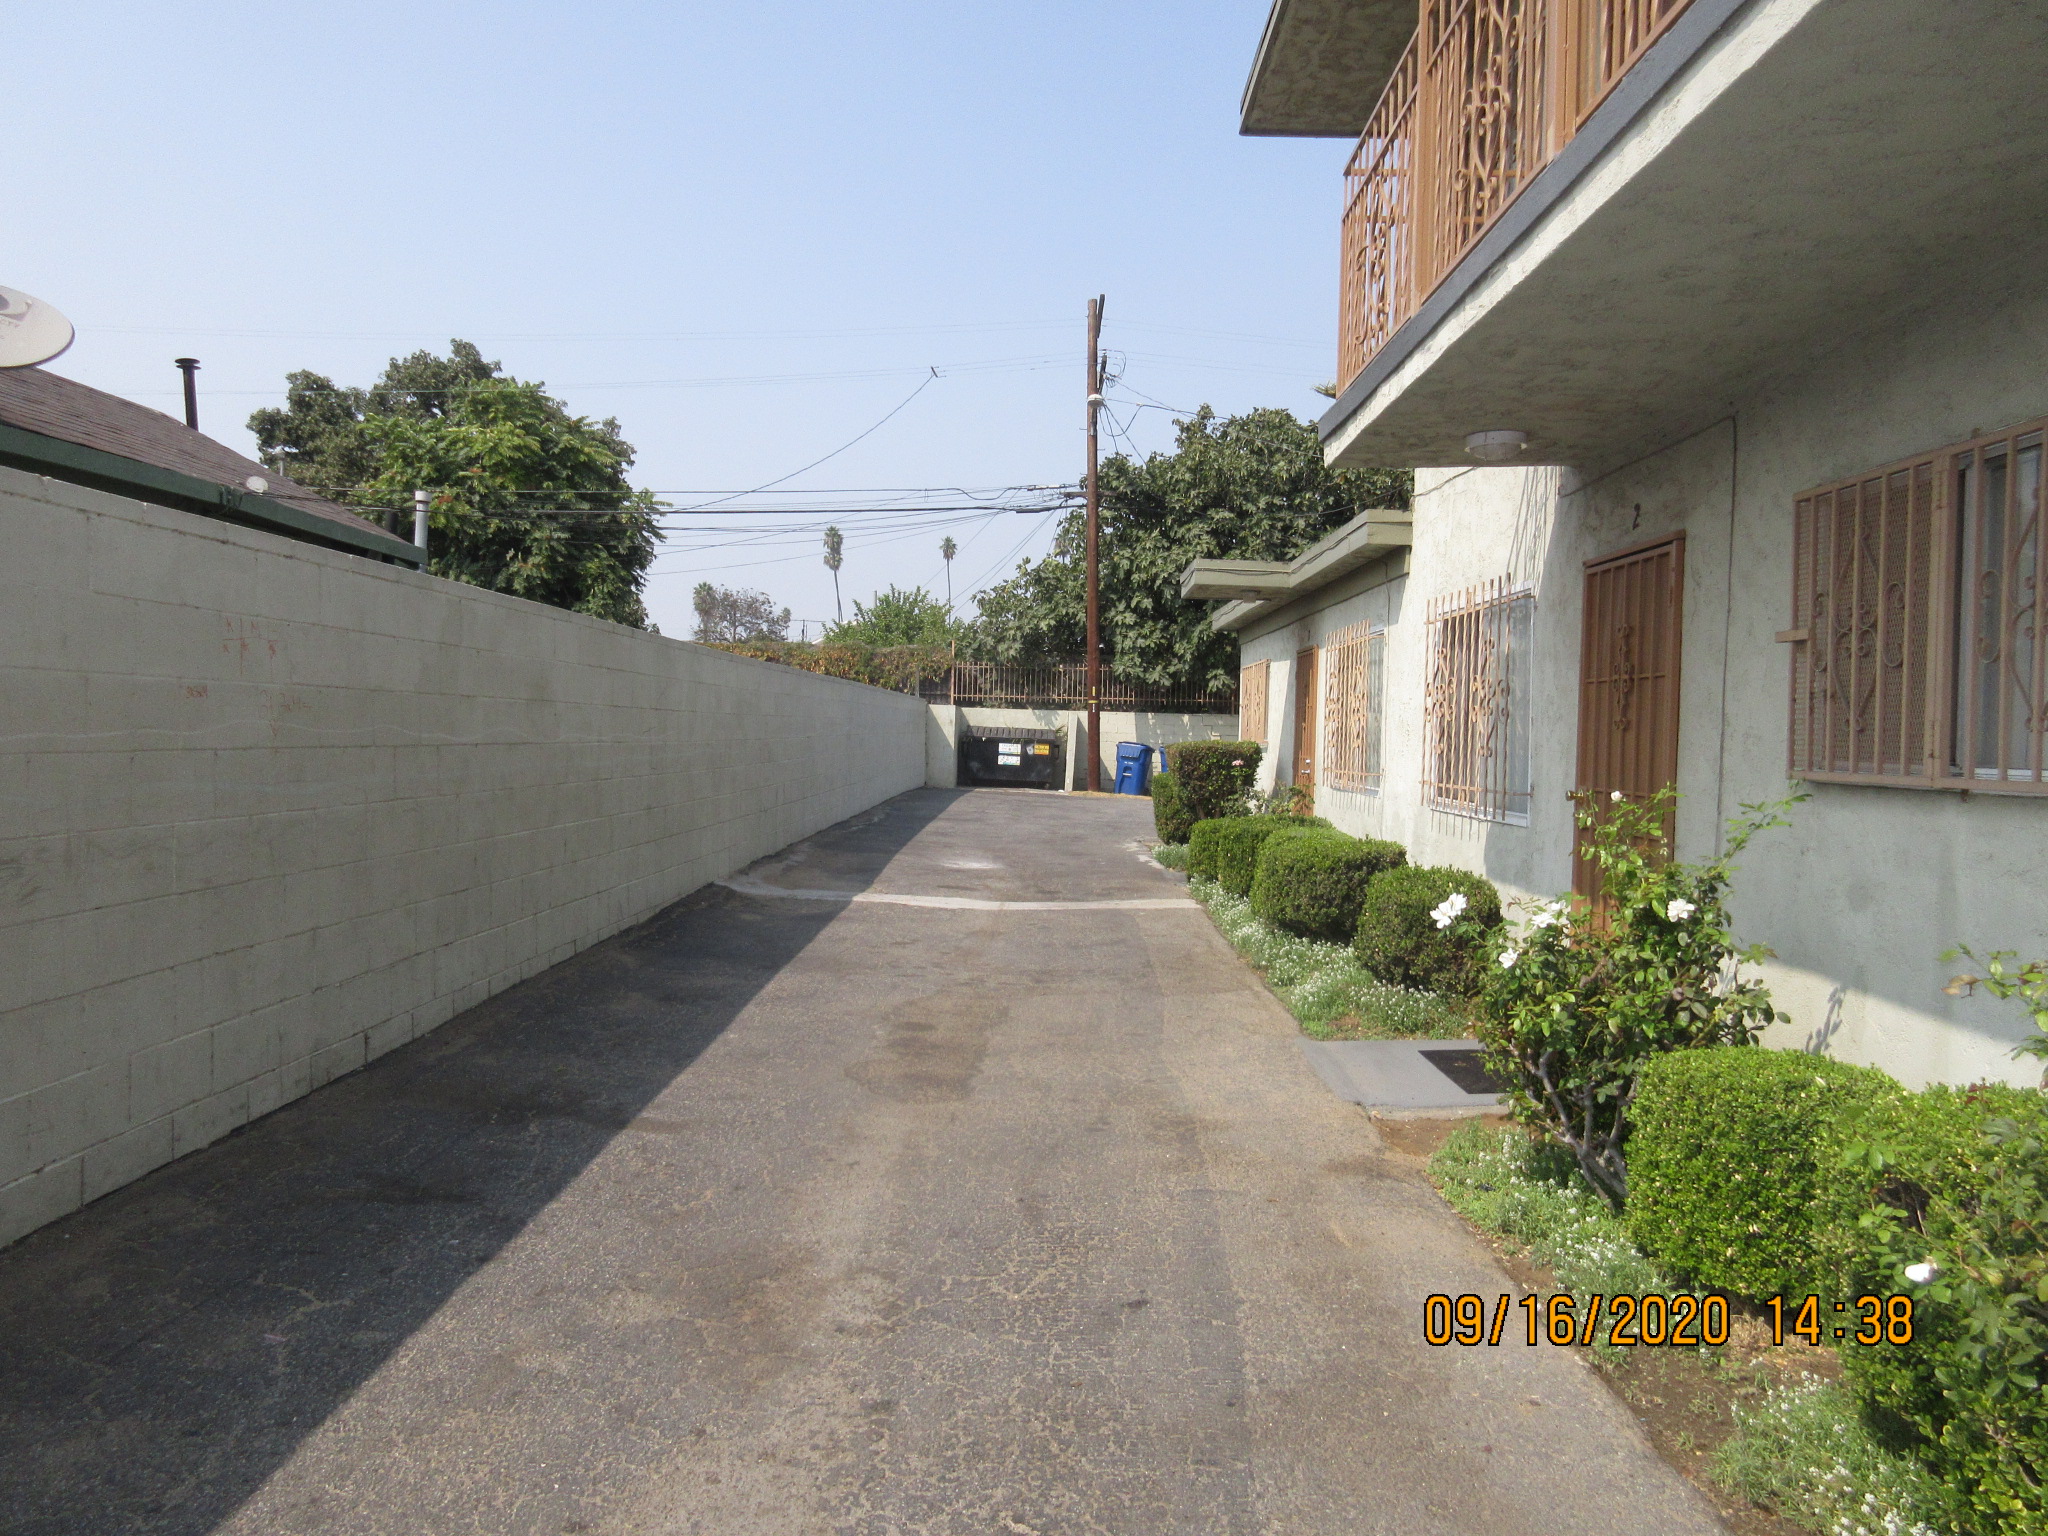 Windward A&B exterior view. Long paved driveway in front of building with trash bins at the end. bars on the window